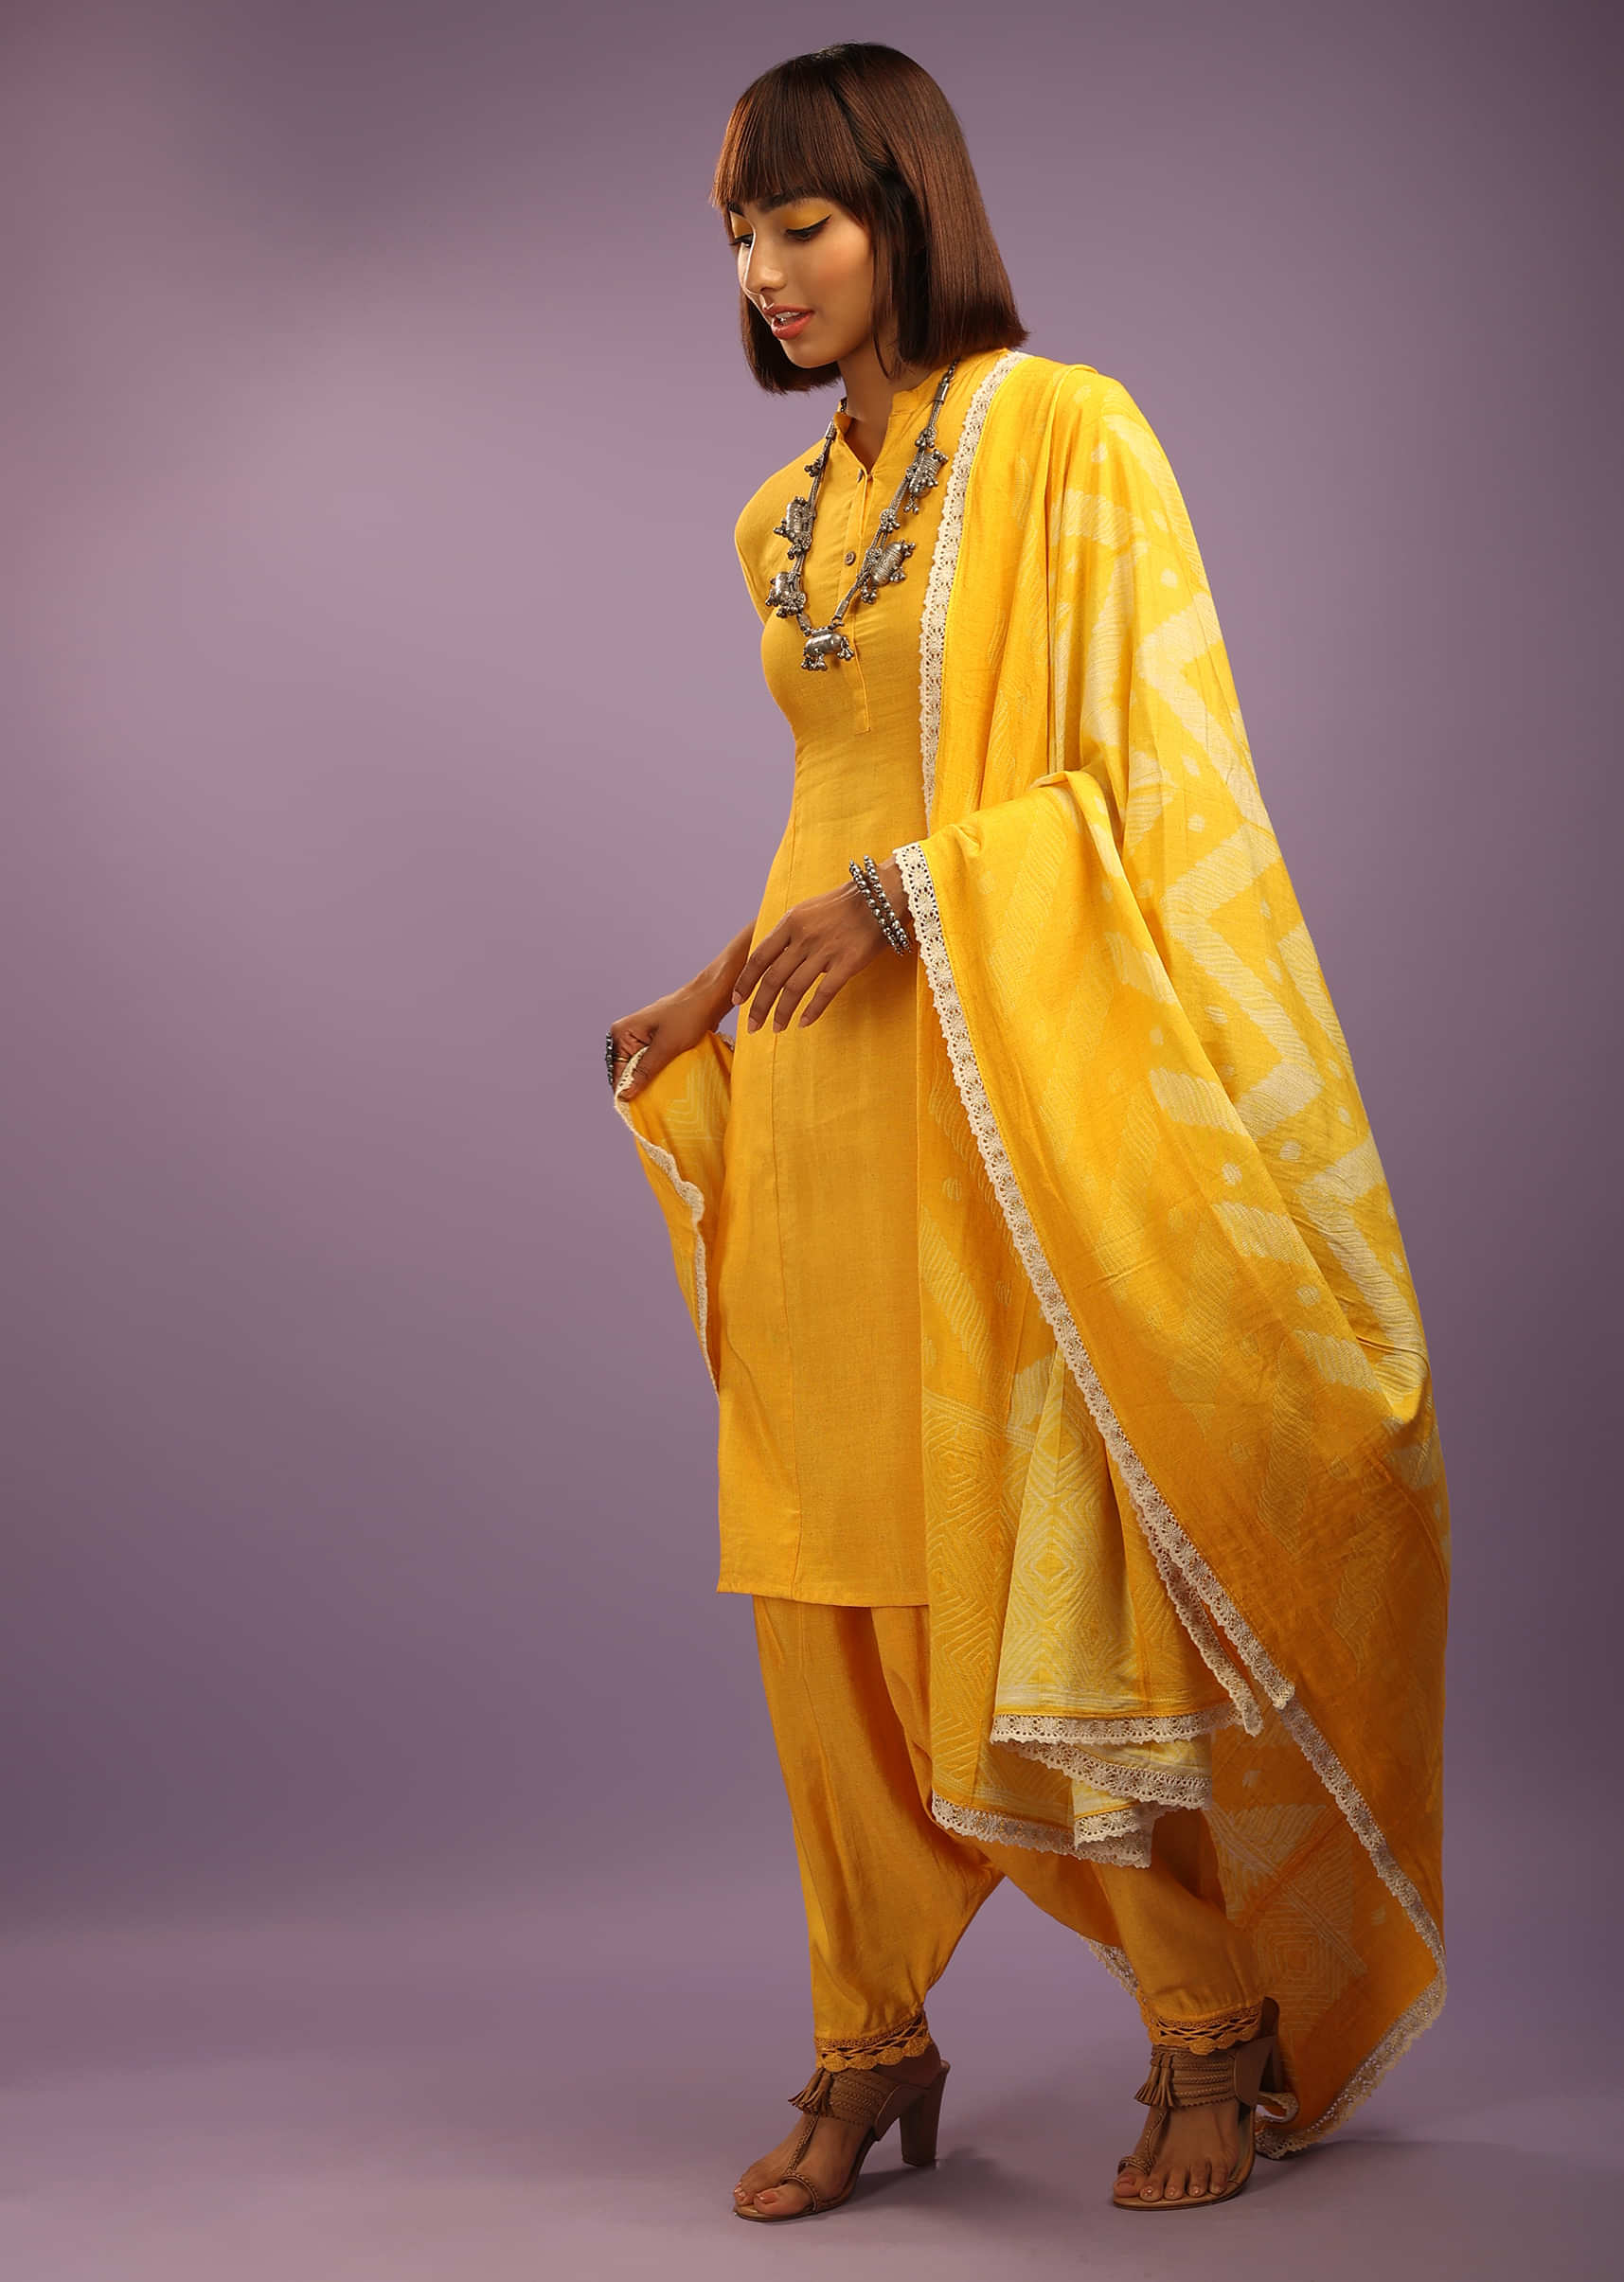 Sun Yellow Cowl Dhoti Suit In Khadi Cotton With Shaded Tie Dye Printed Dupatta  